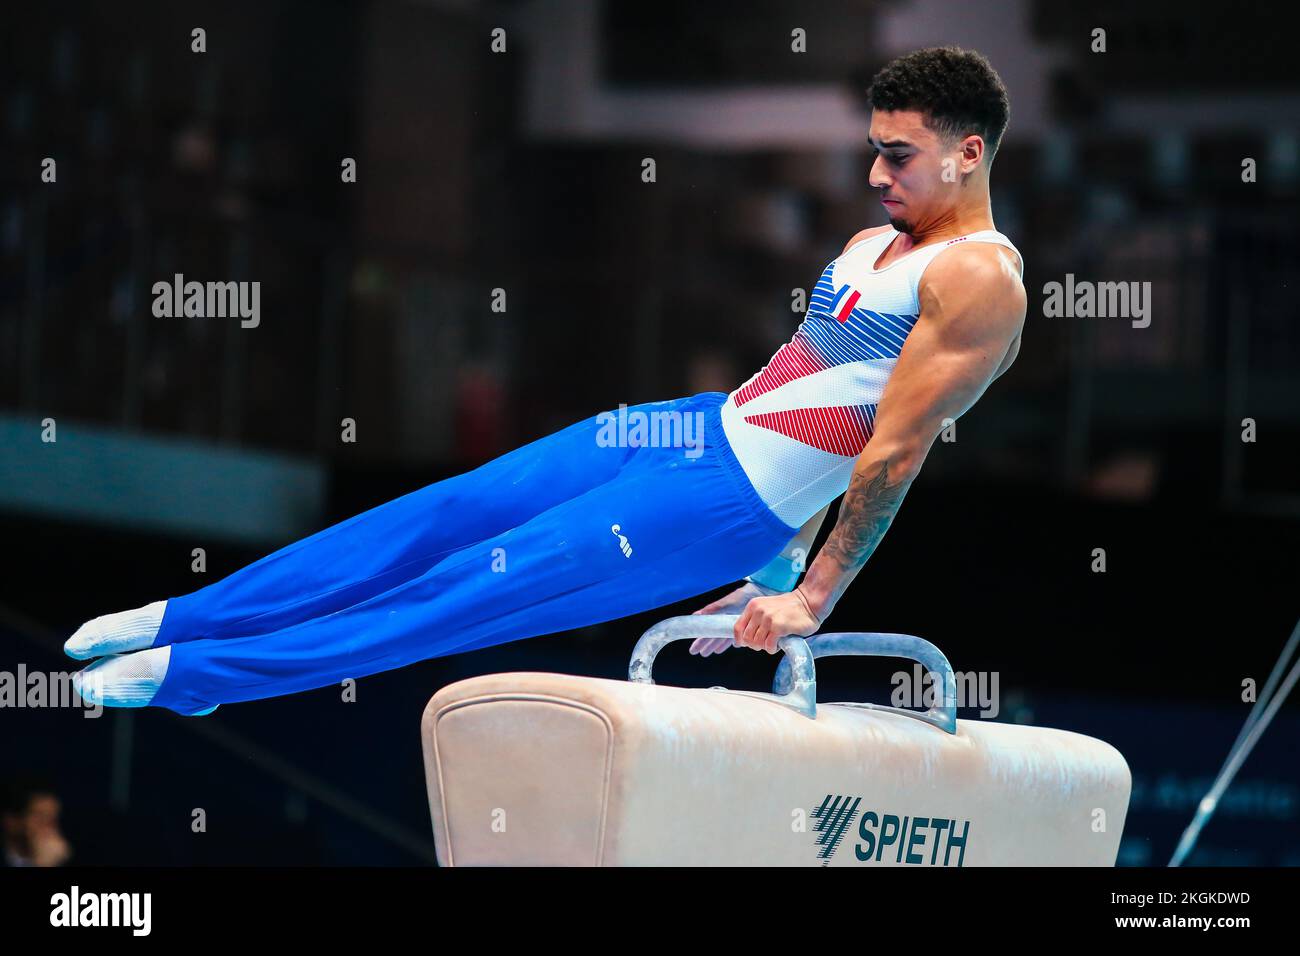 Szczecin, Poland, April 10, 2019:male athlete Frasca Loris of France competes on the pommel horse during the artistic gymnastics championships Stock Photo